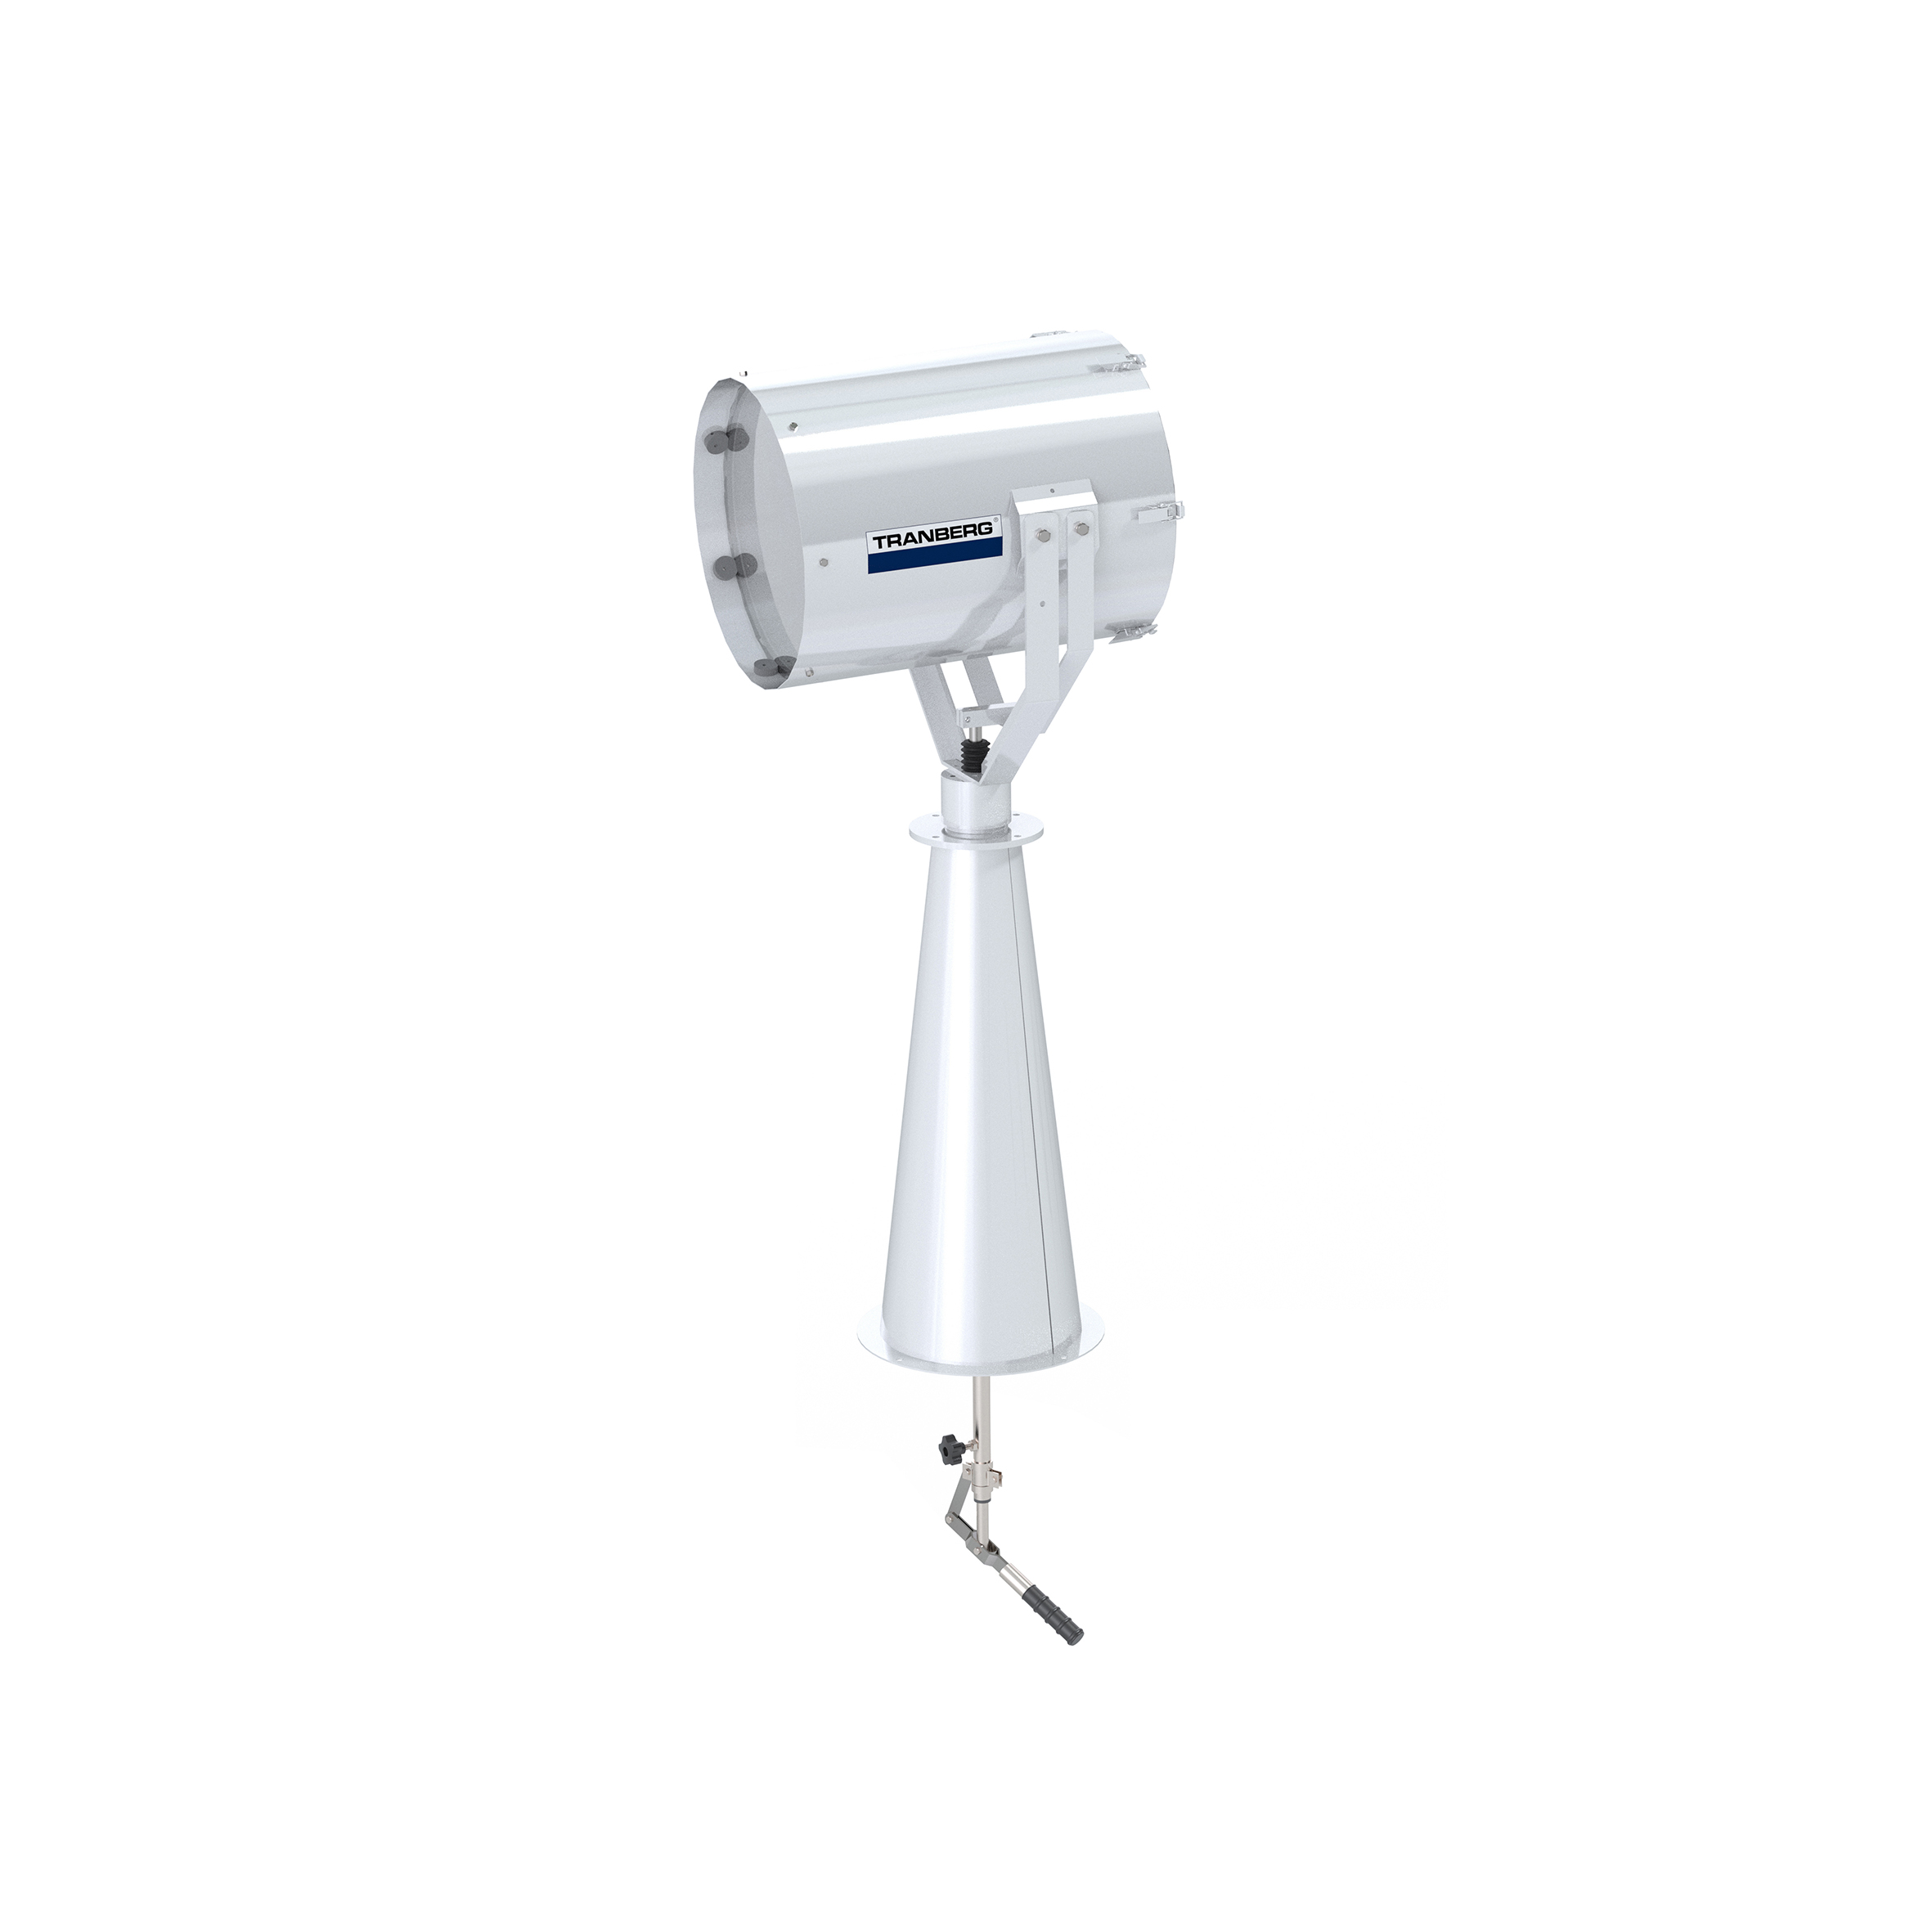 TEF 2630 Searchlight: Halogen 1000W bulb incl, 230V, Bridge Controlled, Stainless Steel, W/300 mm pe